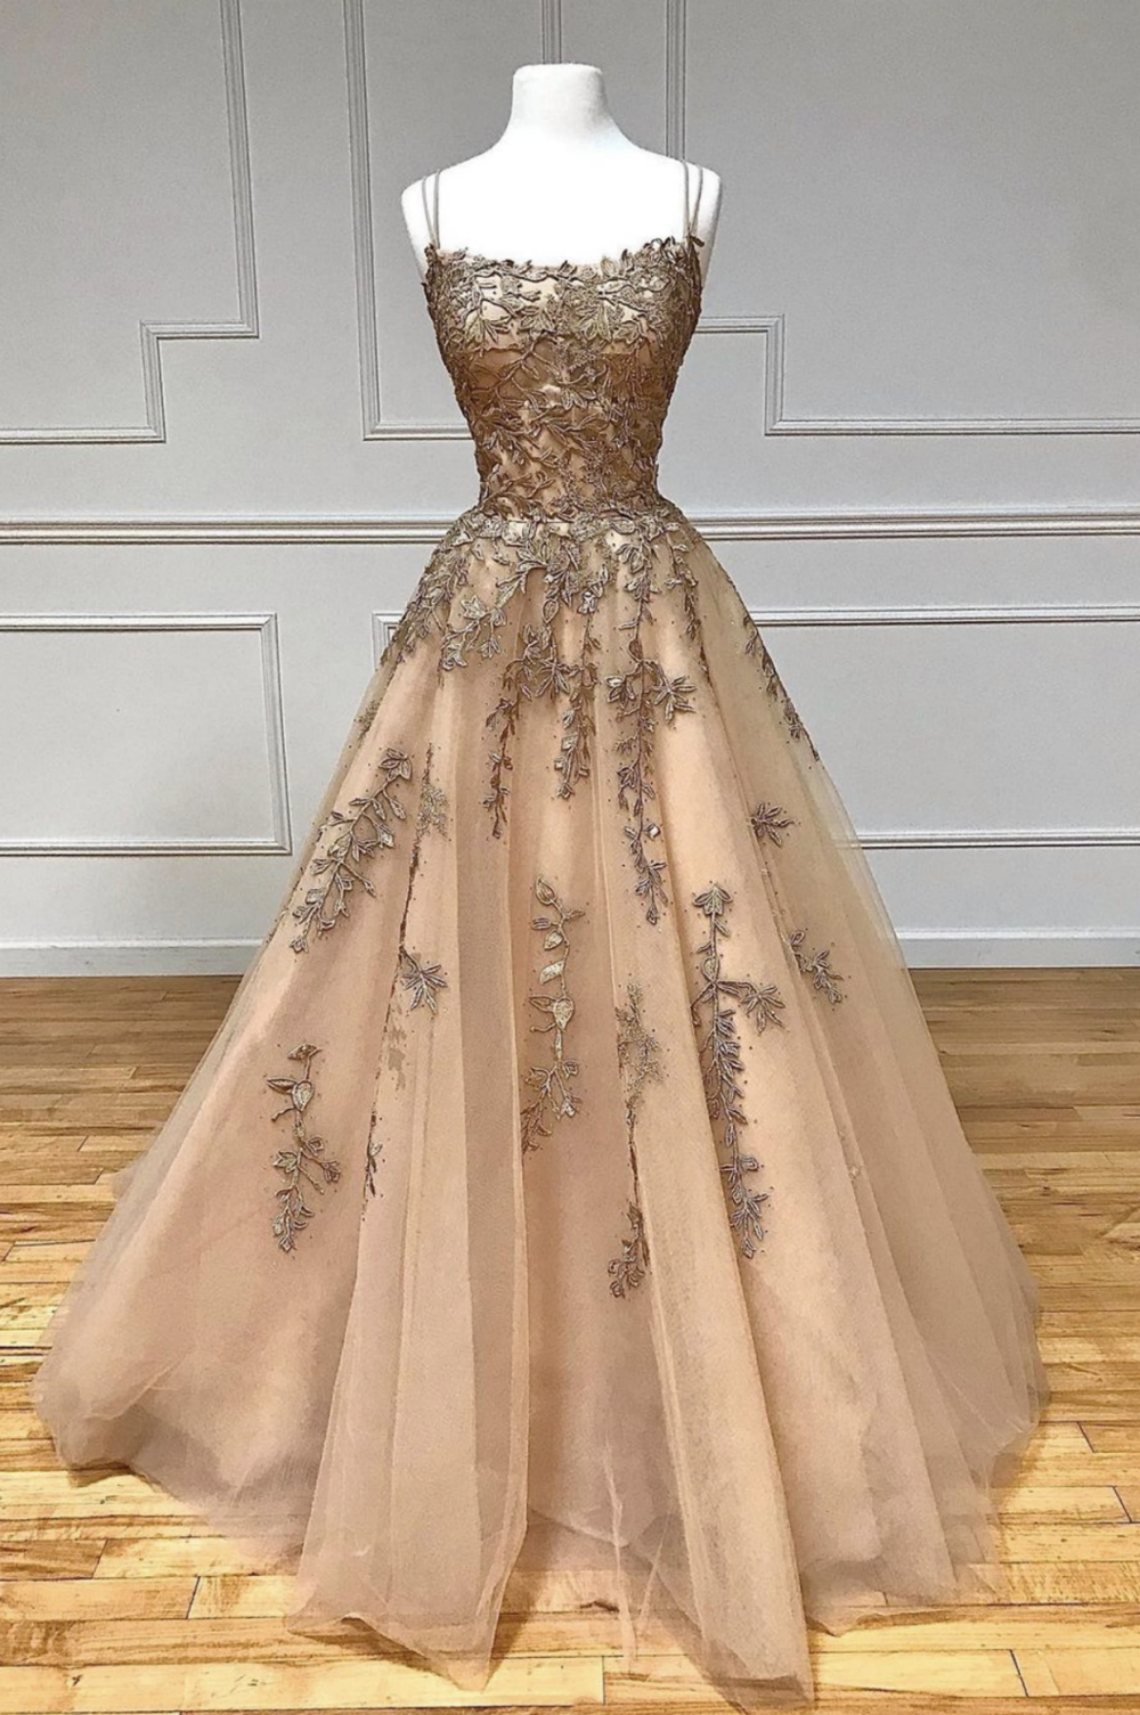 Classic U-shaped Neckline With Lace Applique And Diamond Embellishments On The Back Lace Up, Open Back And Floor Length Dress, Party Ball Dress